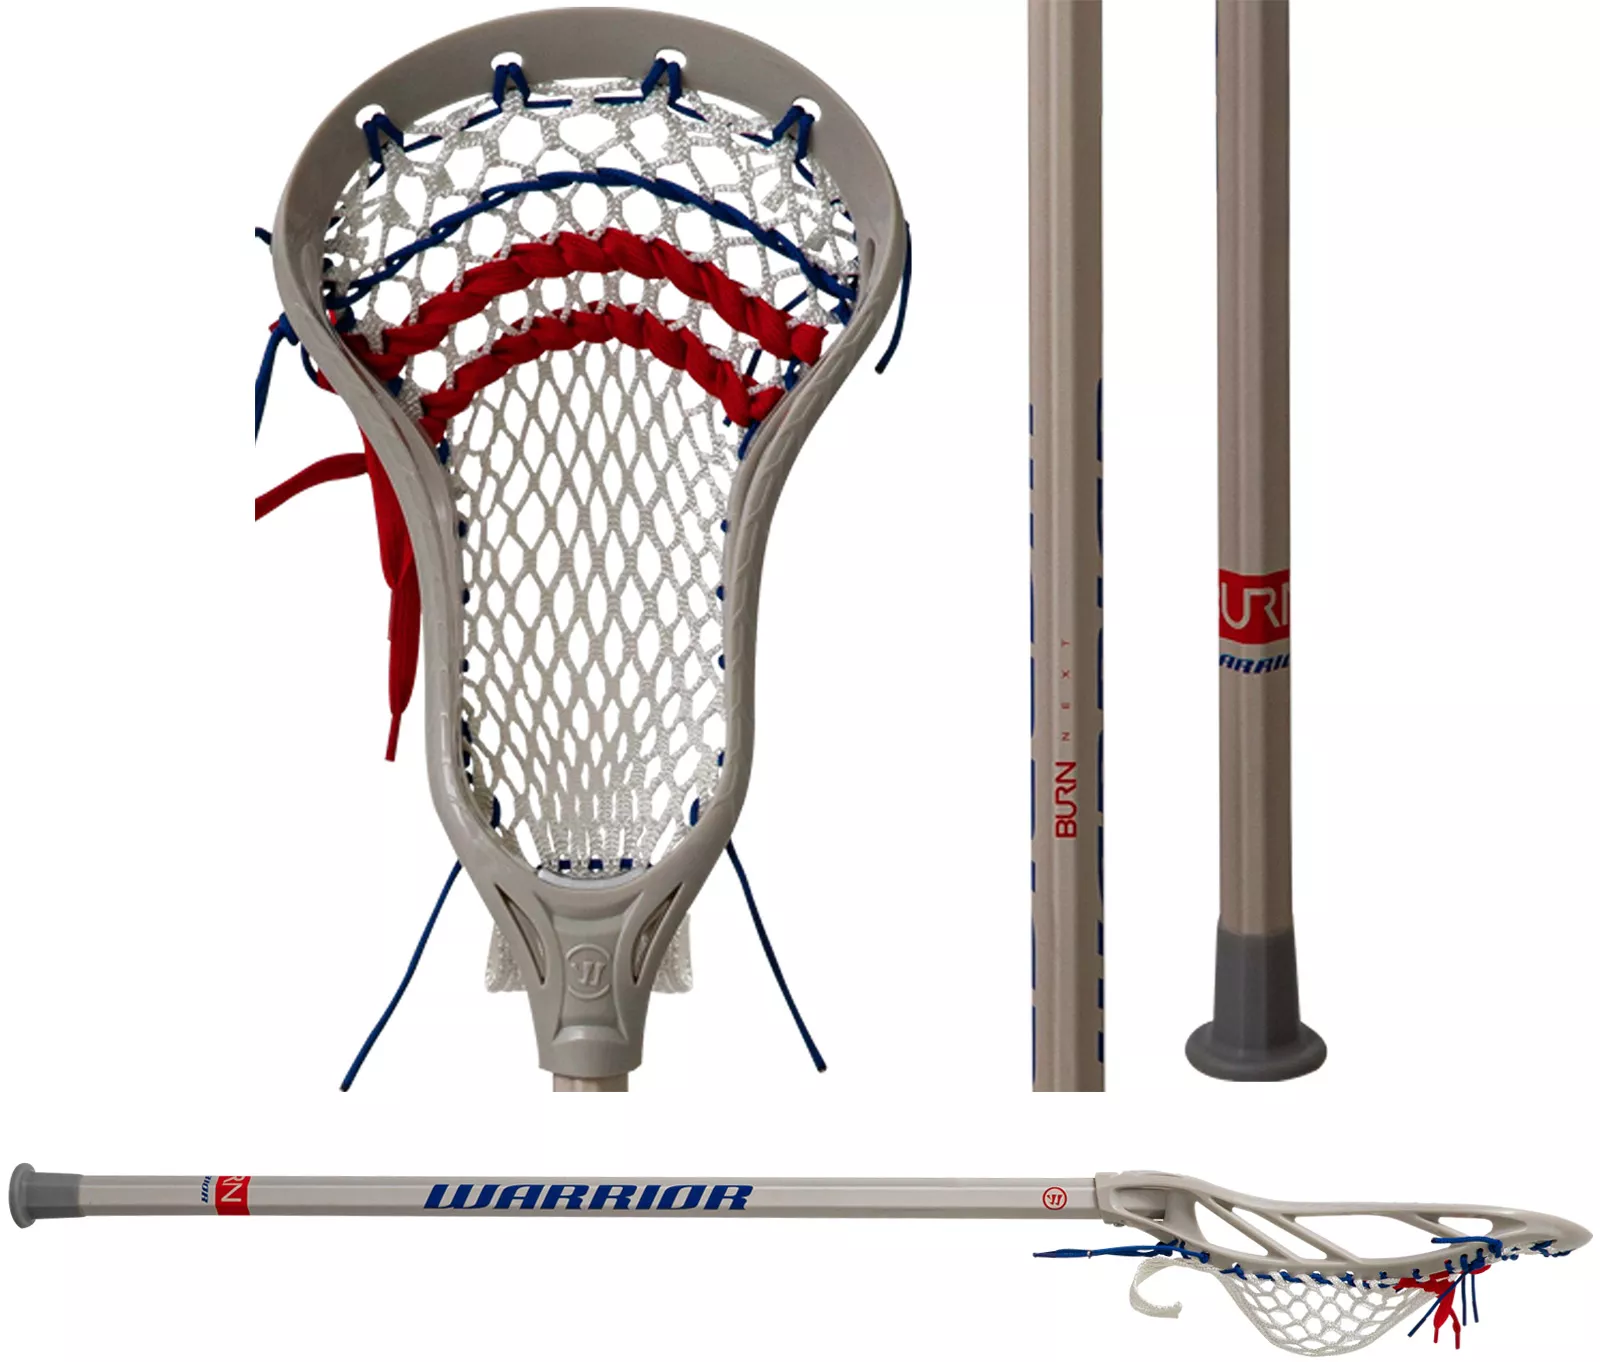 How to tape a lacrosse stick